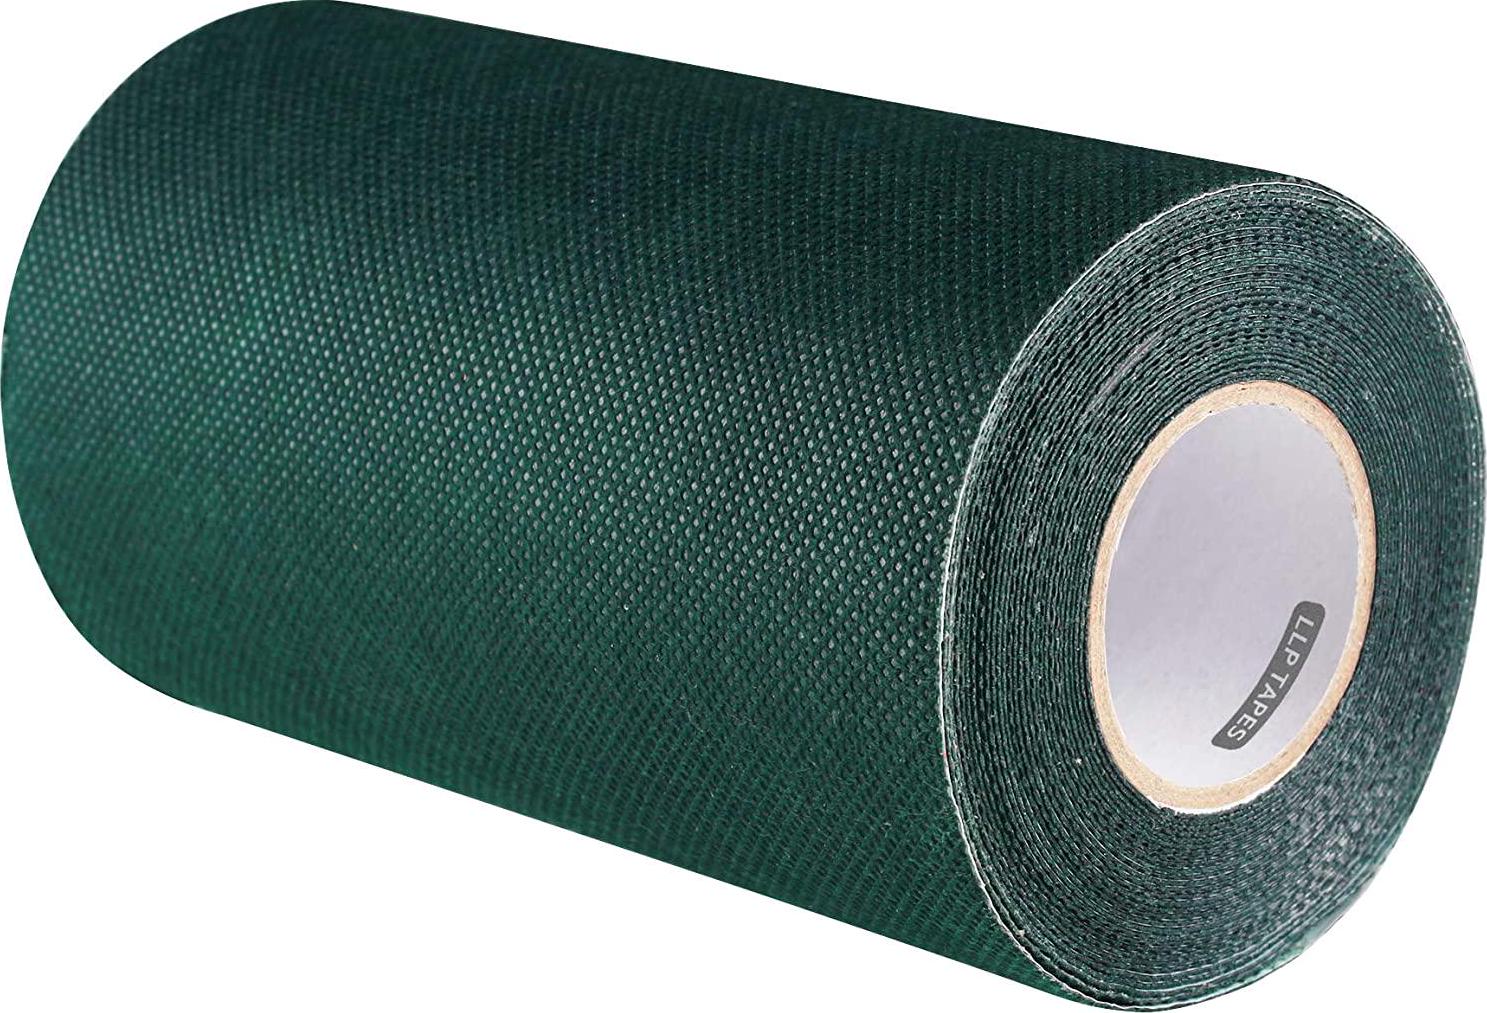 LLPT, LLPT Artificial Grass Seam Tape 6 x 40 Feet Heavy Duty Adhesive Outdoor Indoor Lawn for Carpet Grass Mat Turf Seam Jointing (AG640)